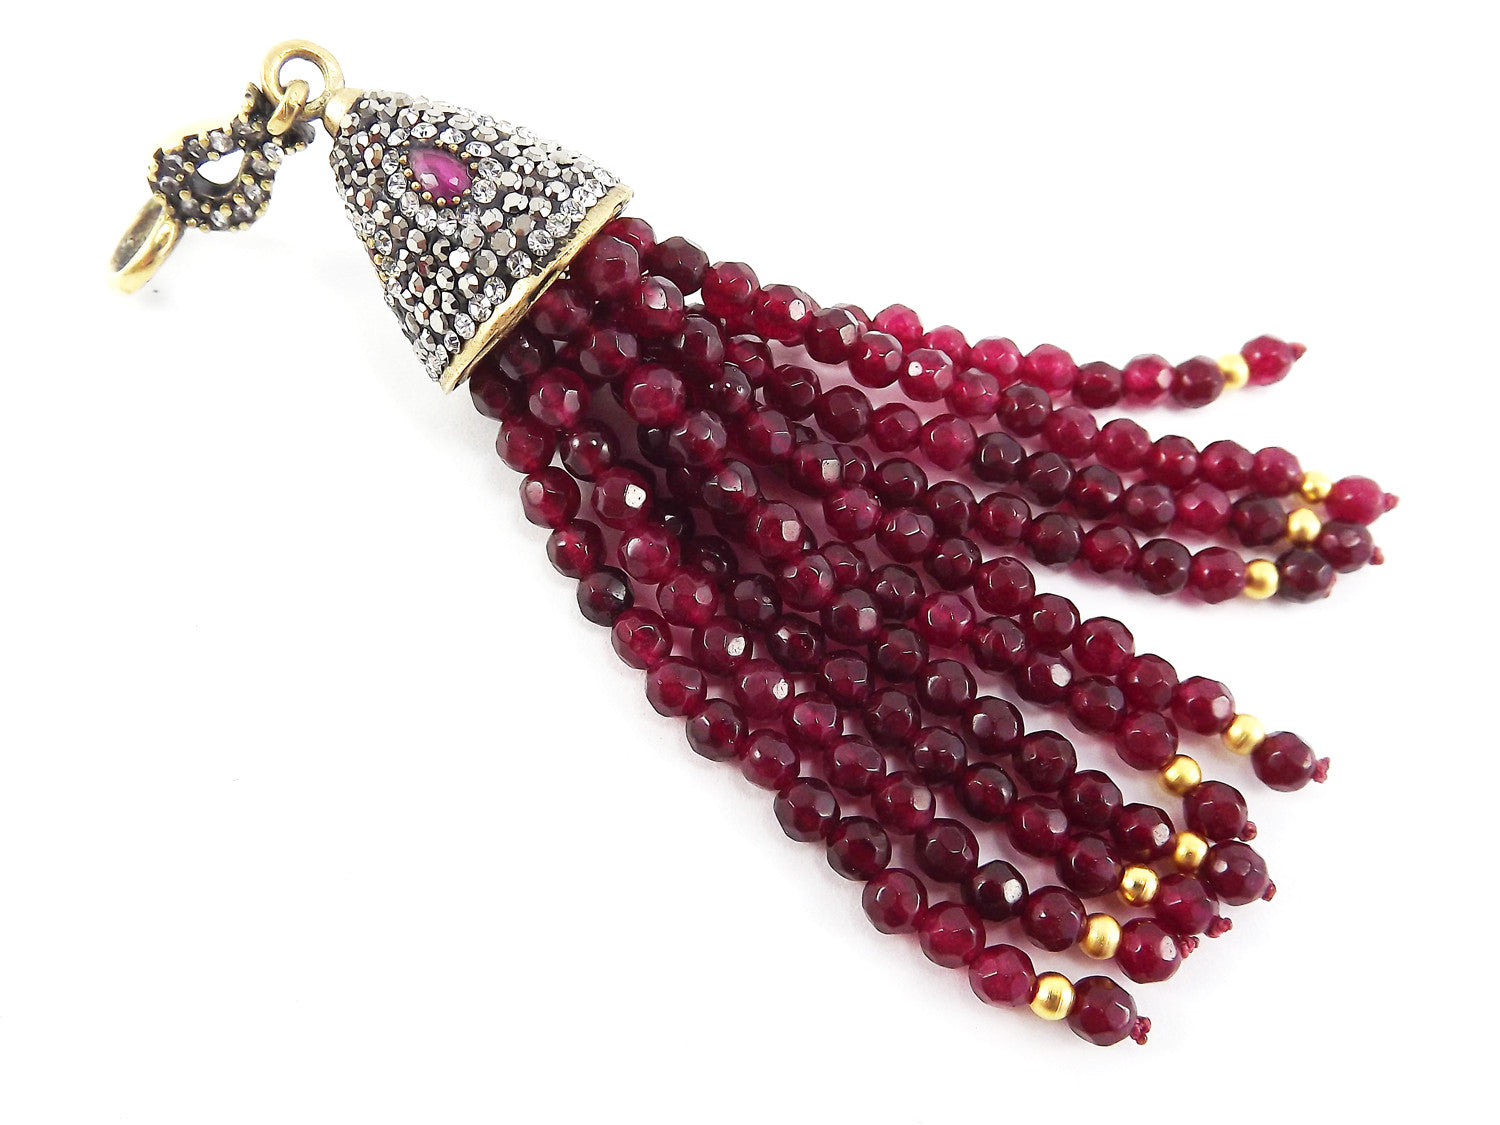 Large Long Garnet Red Facet Cut Jade Stone Beaded Tassel with Encrusted Crystal Accents - Antique Bronze - 1PC